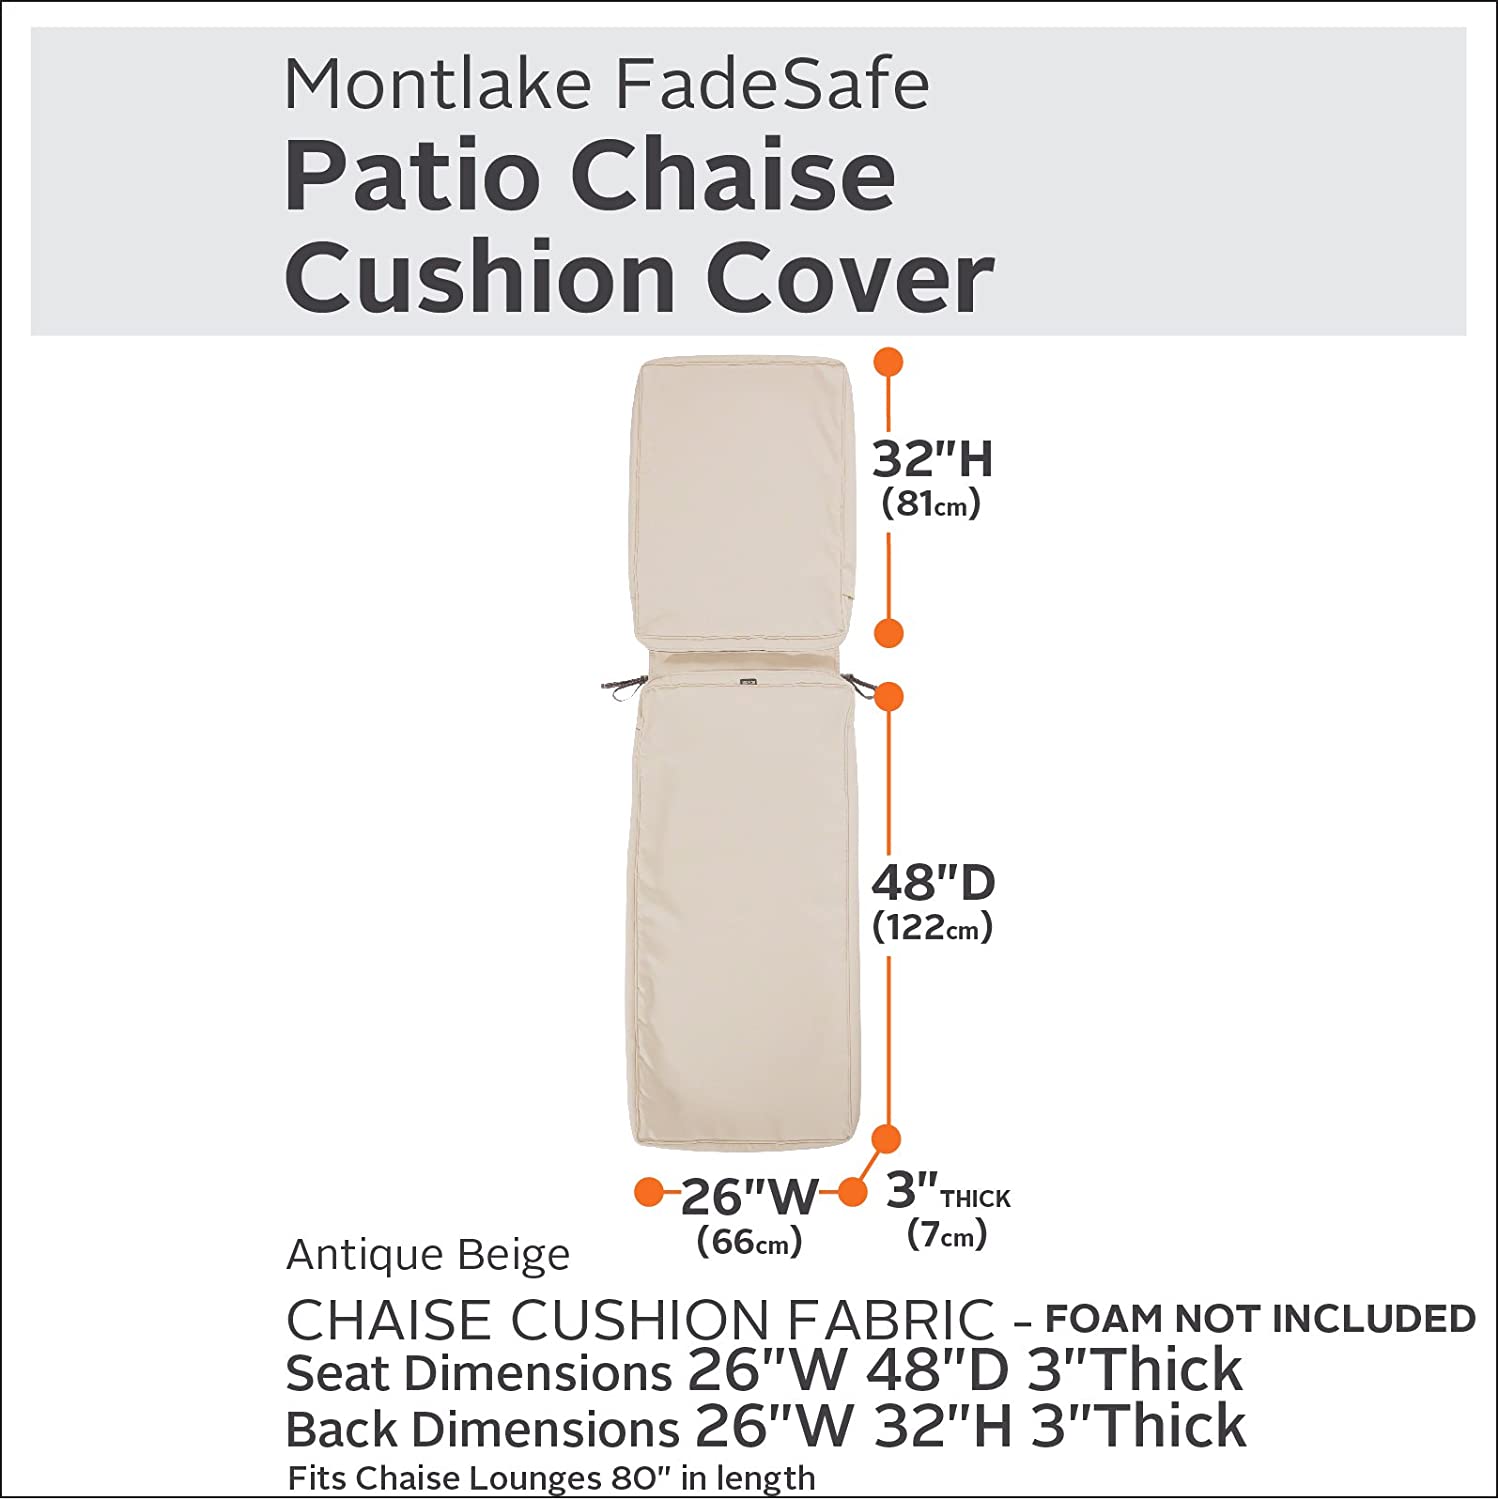 Classic Accessories Montlake Water-Resistant 80 x 26 x 3 Inch Outdoor Chaise Lounge Cushion Slip Cover, Patio Furniture Cushion Cover, Antique Beige, Patio Furniture Cushion Covers